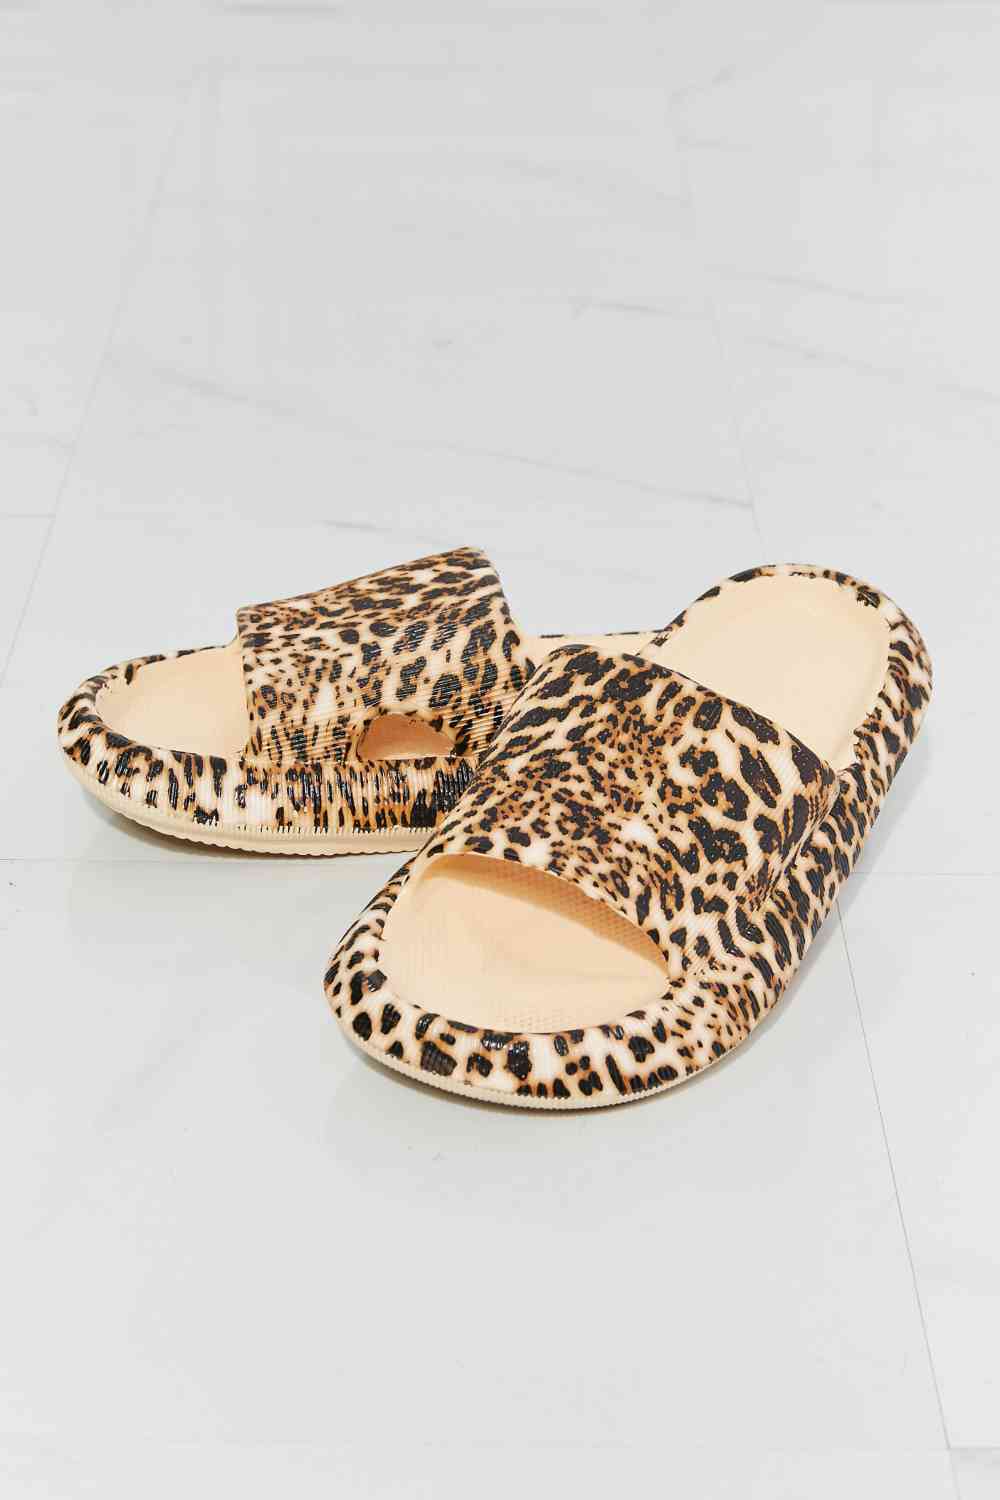 Arms Around Me Open Toe Slide in Leopard - Accessories - Shoes - 5 - 2024